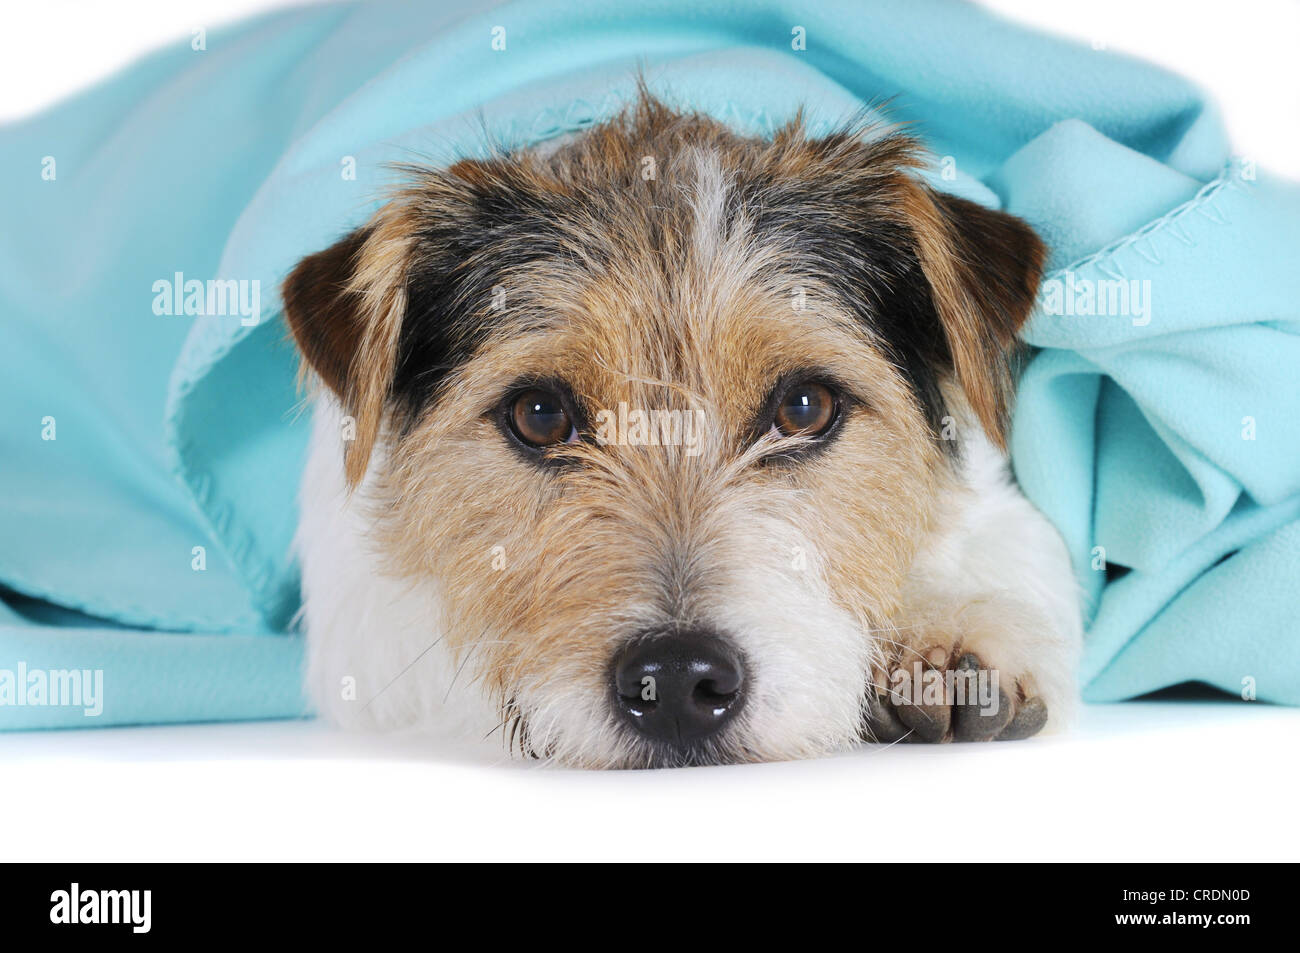 Jack Russell Terrier, lying under a turquoise blanket, head resting on floor Stock Photo